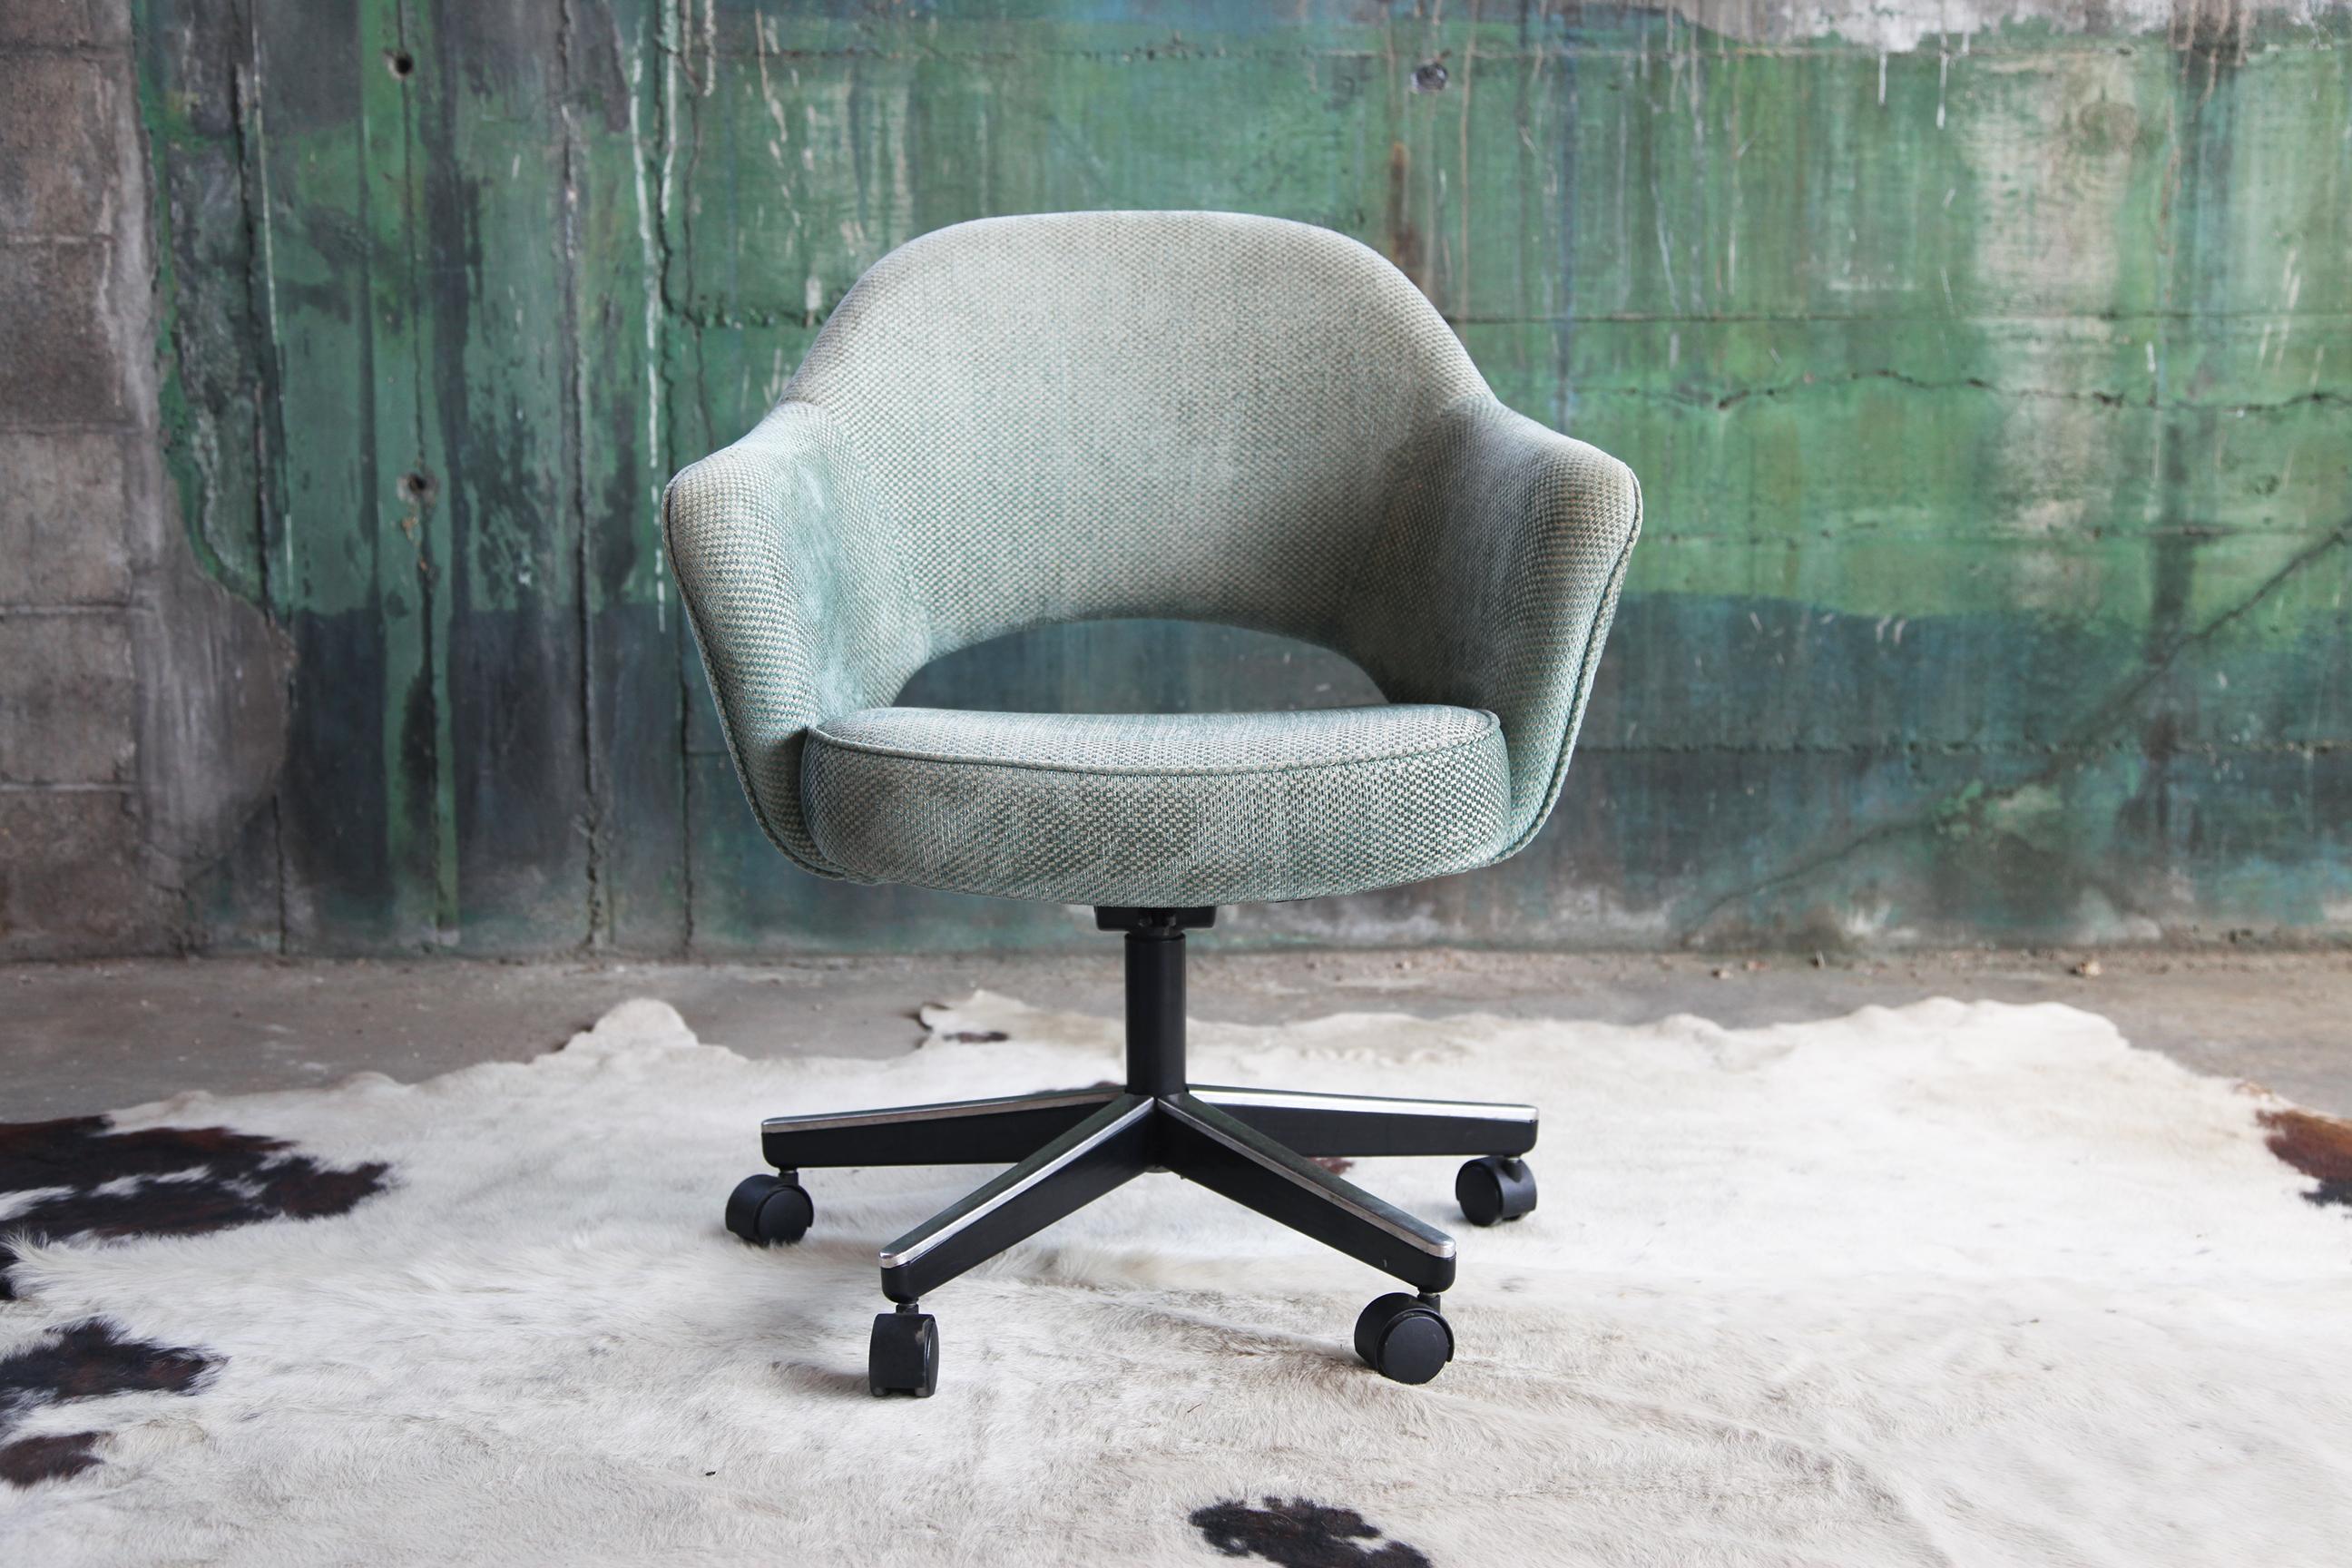 1980s Vintage executive armchair with original light turquoise woven knoll textile. Beautiful faded color, great vintage look. 

Designed in 1950 by Eero Saarinen for Knoll International. 
Made by Knoll International North America, marked with